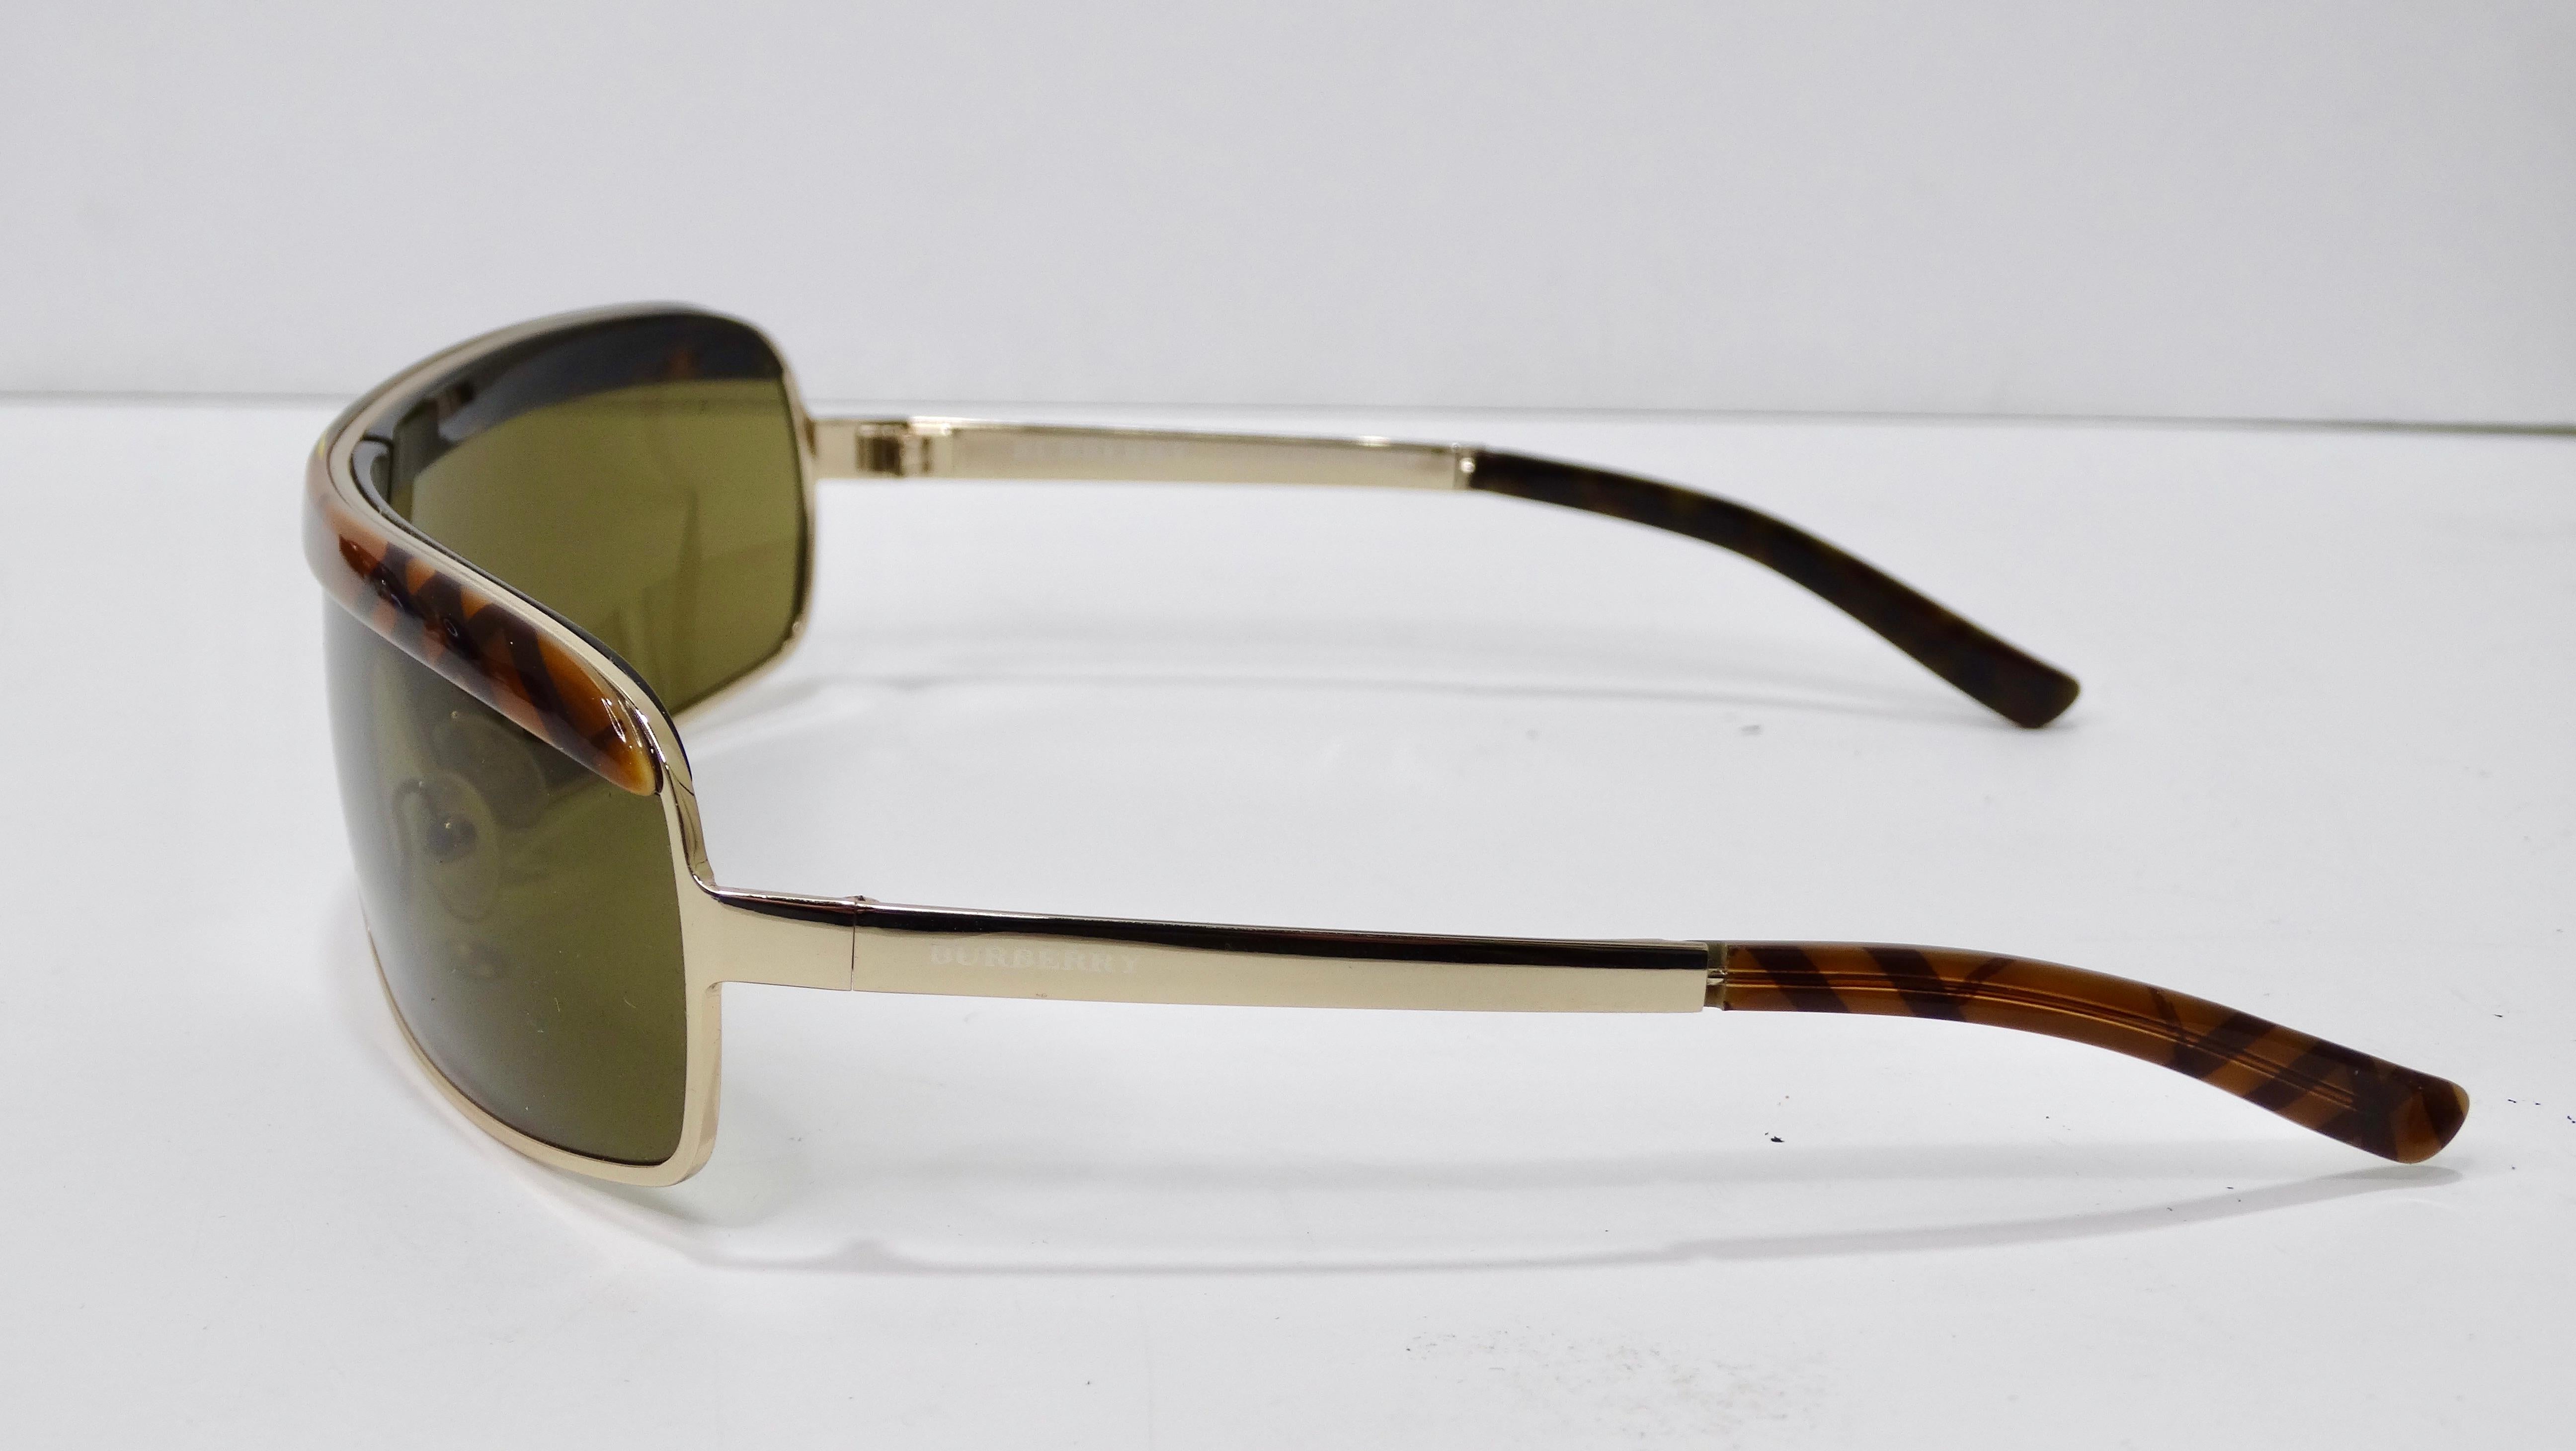 Burberry 1990's Patterned Shield Sunglasses  In Excellent Condition For Sale In Scottsdale, AZ